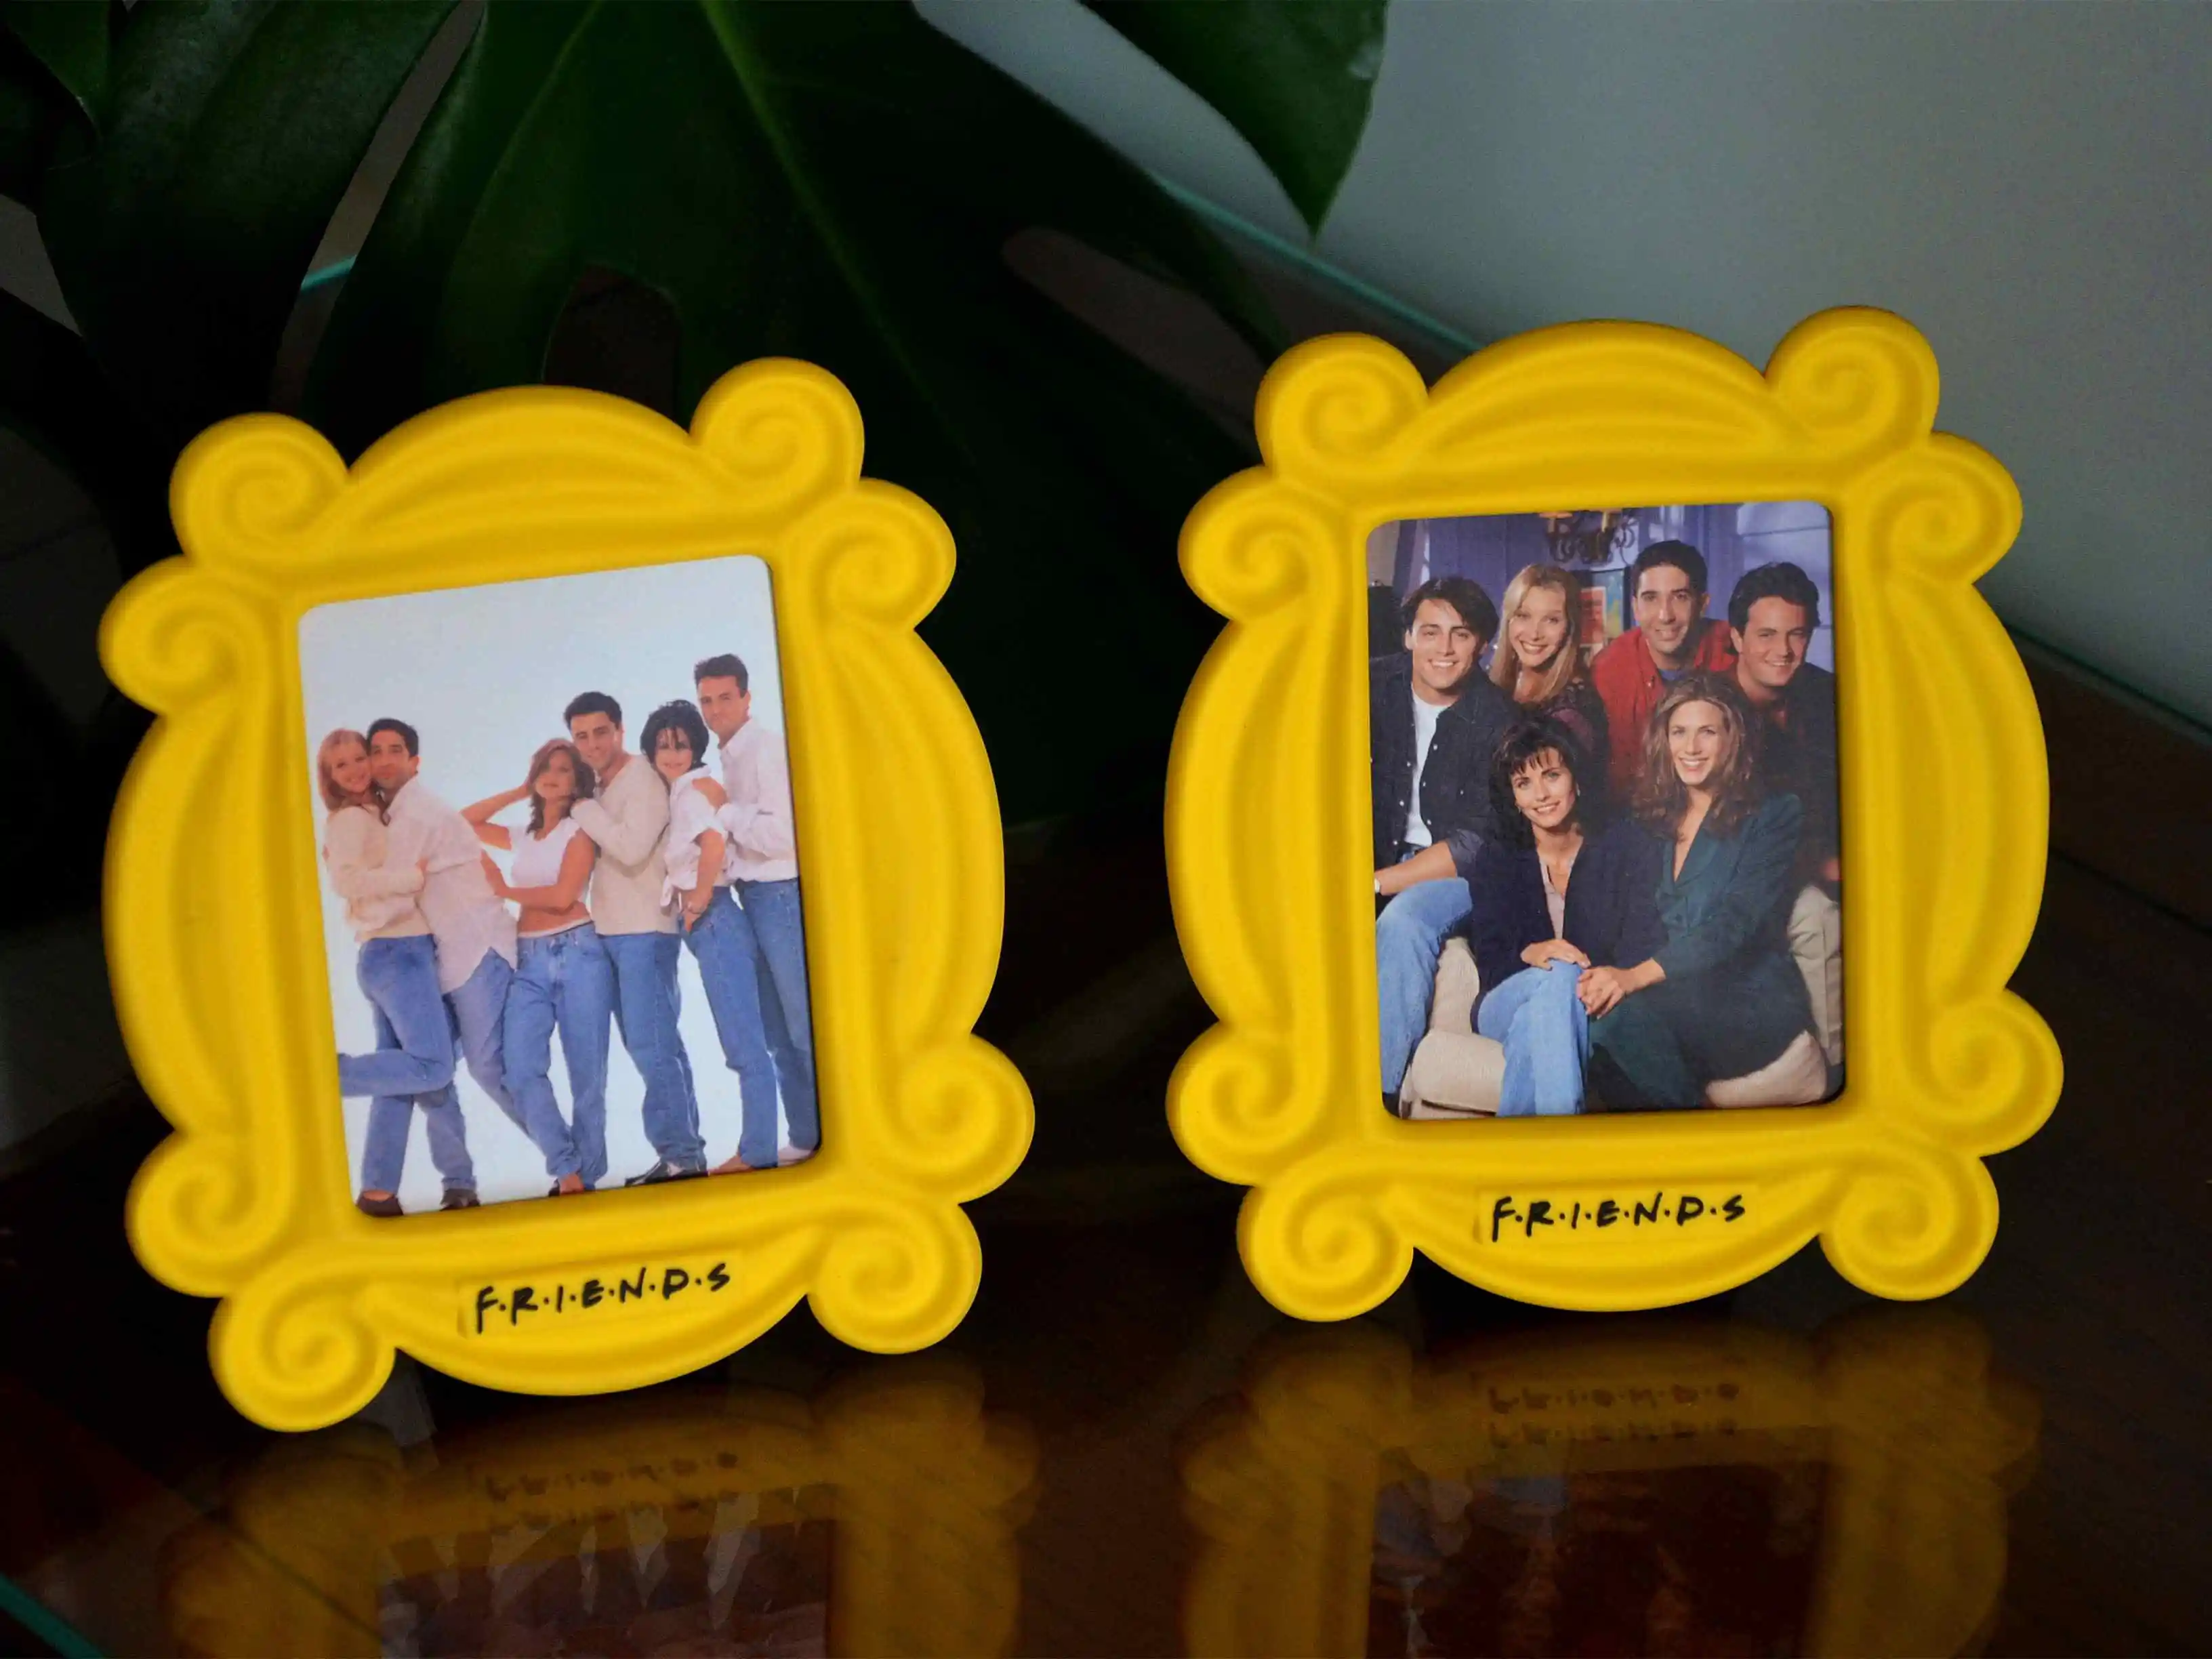 Friends TV Show Photo Frame Handmade Monica Door Frame Yellow Photo Frames Collectible Home Decor Desk Ornaments Friends Gifts